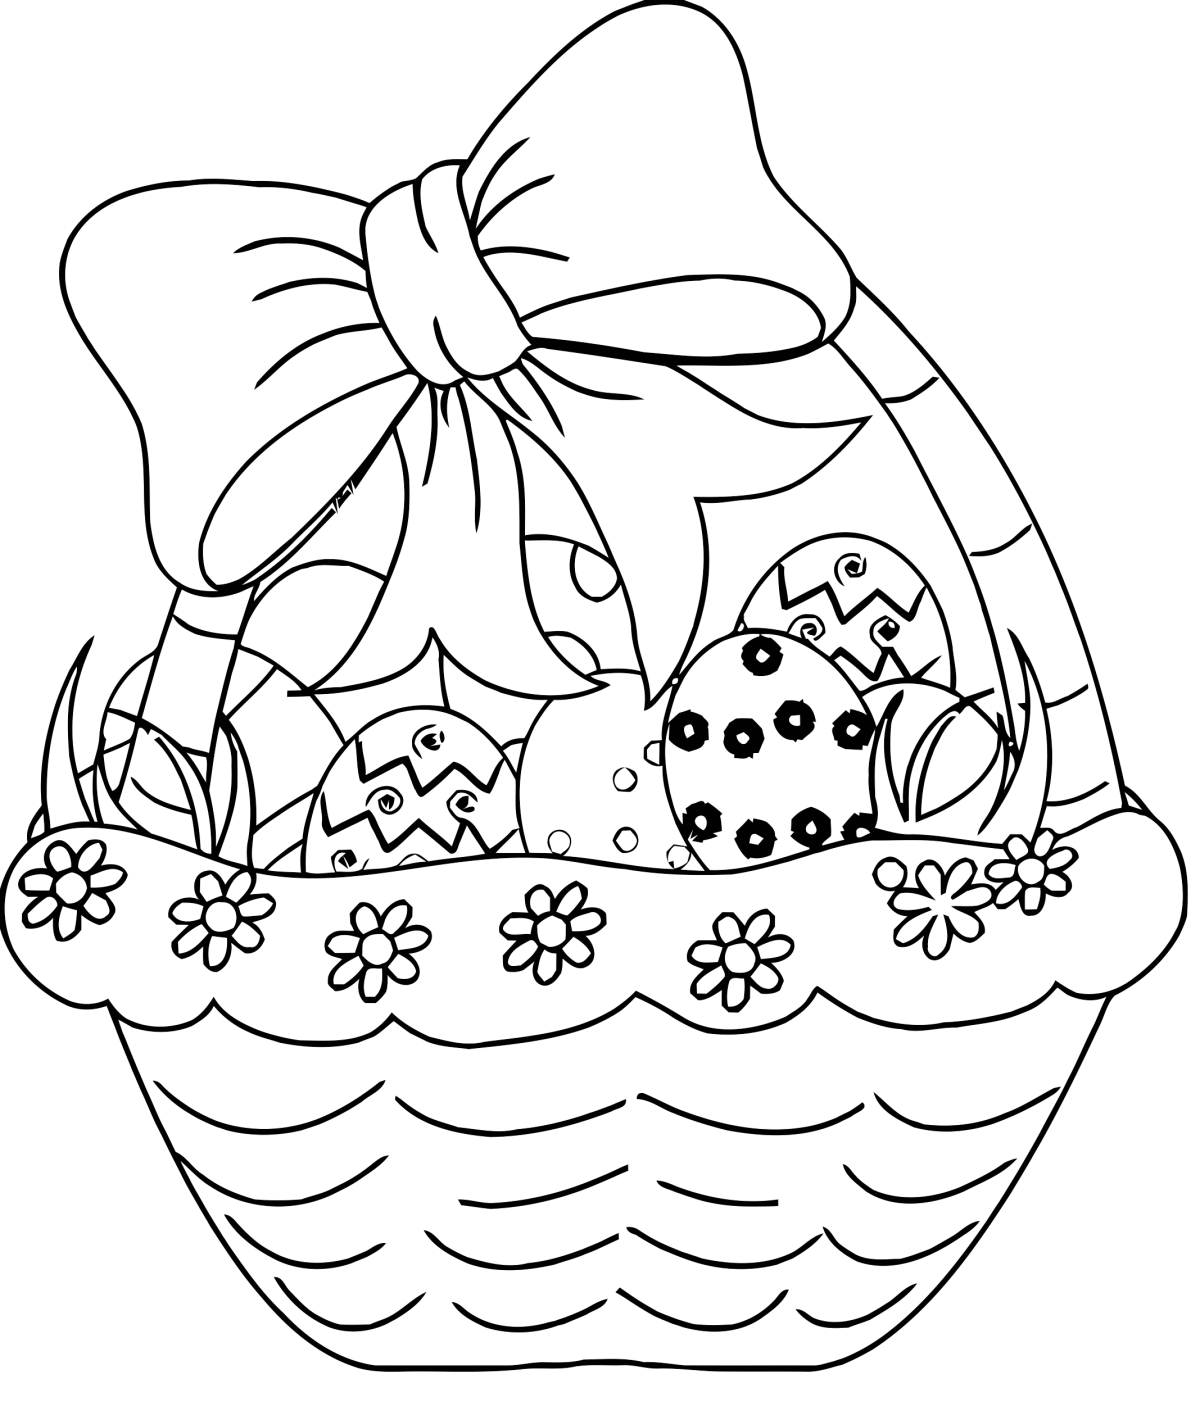 Simple Easter Coloring Page 293  File for DIY T shirt Mug